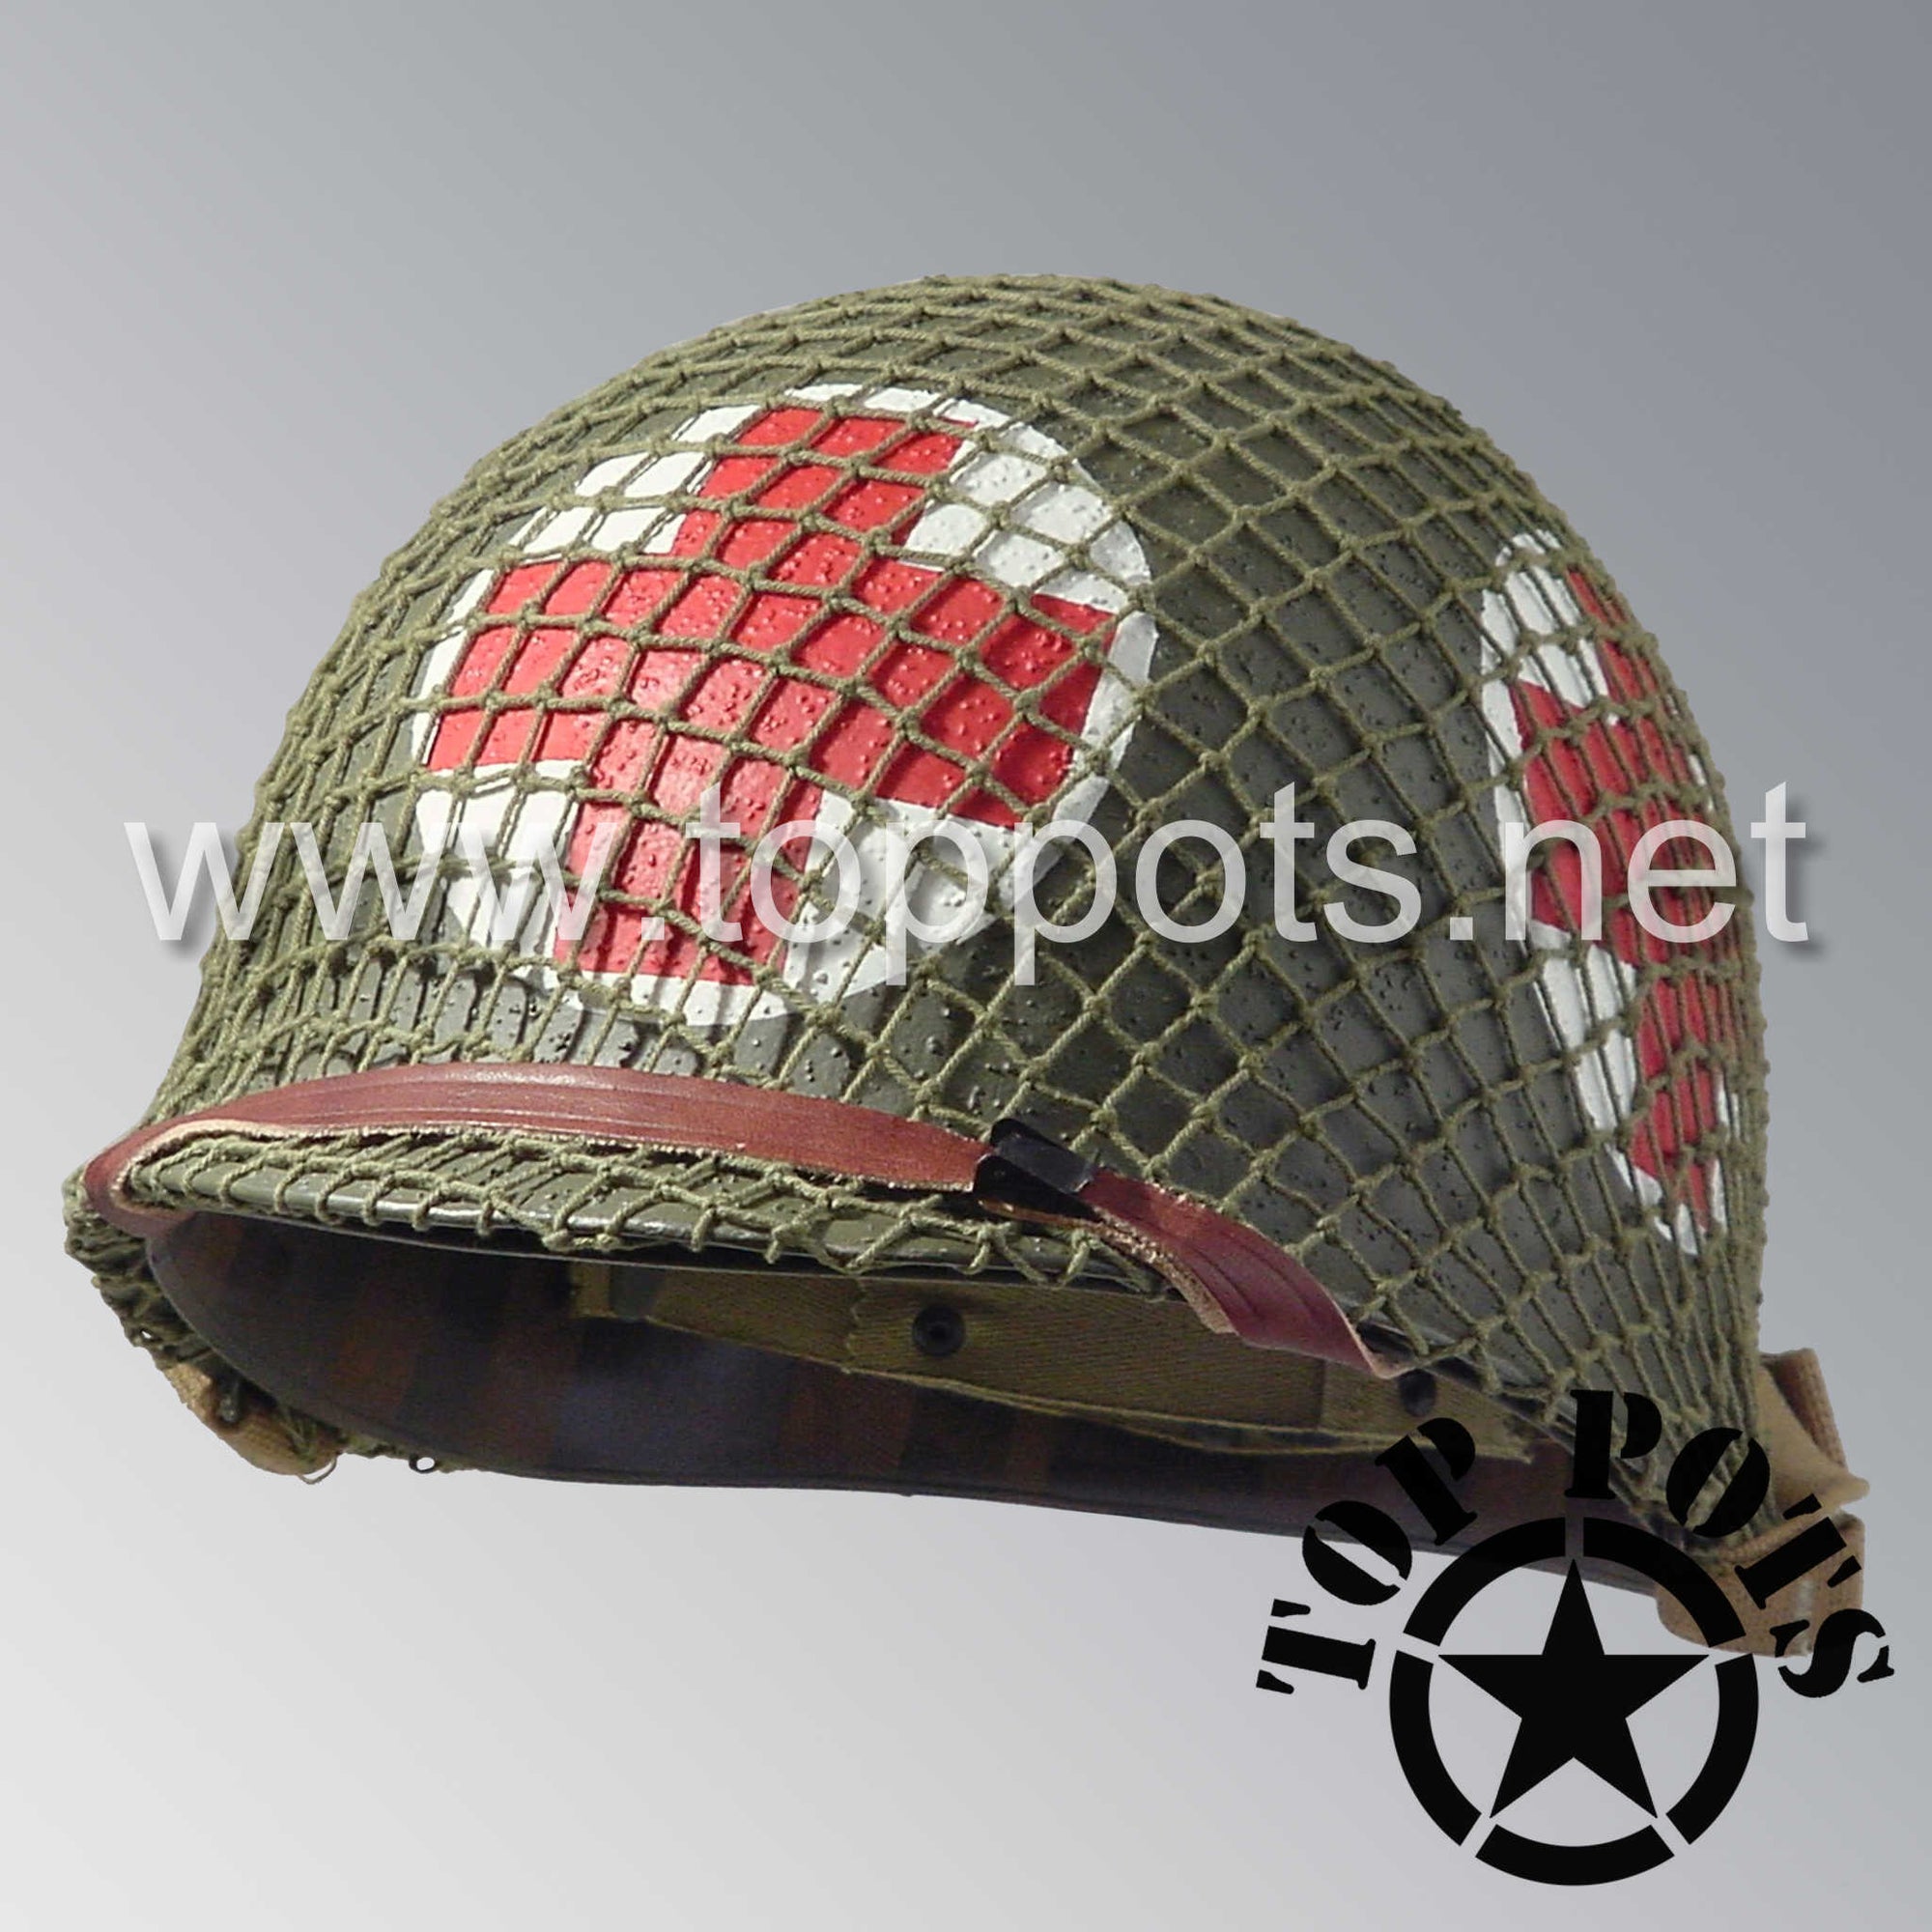 WWII US Army Restored Original M1 Infantry Helmet Swivel Bale Shell and Liner with Four Panel Medic Emblem with OD 3 Net